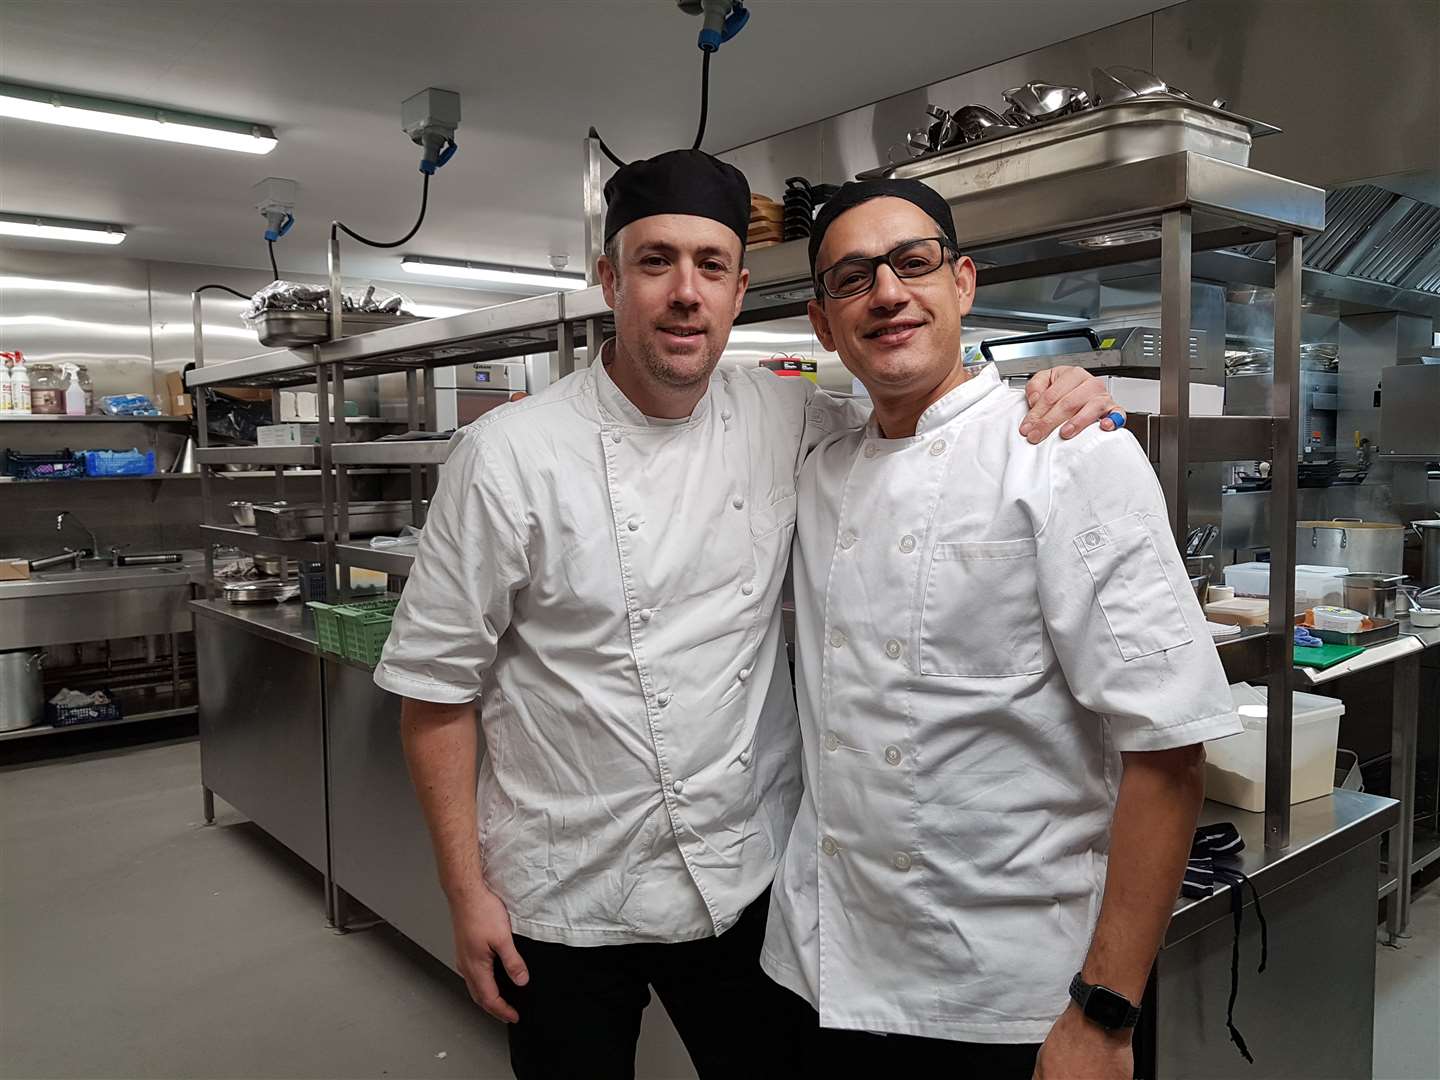 Olly Bird, executive chef and Zine Abdi, head chef at Stubbs Restaurant and Bar in Ashford